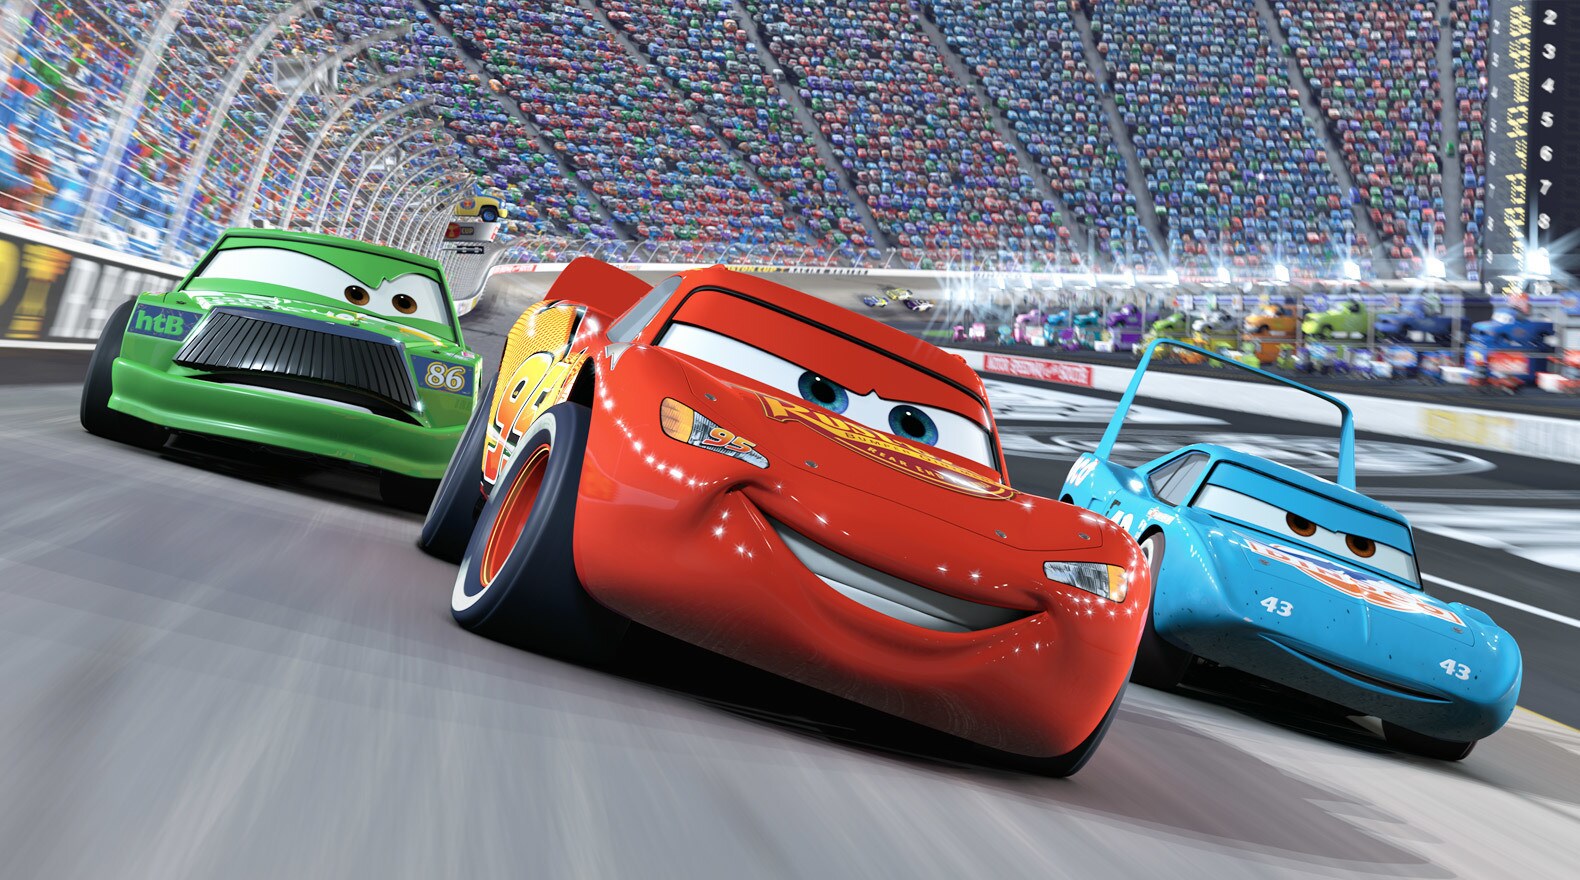 Lightning McQueen is pretty fast for a rookie racecar!